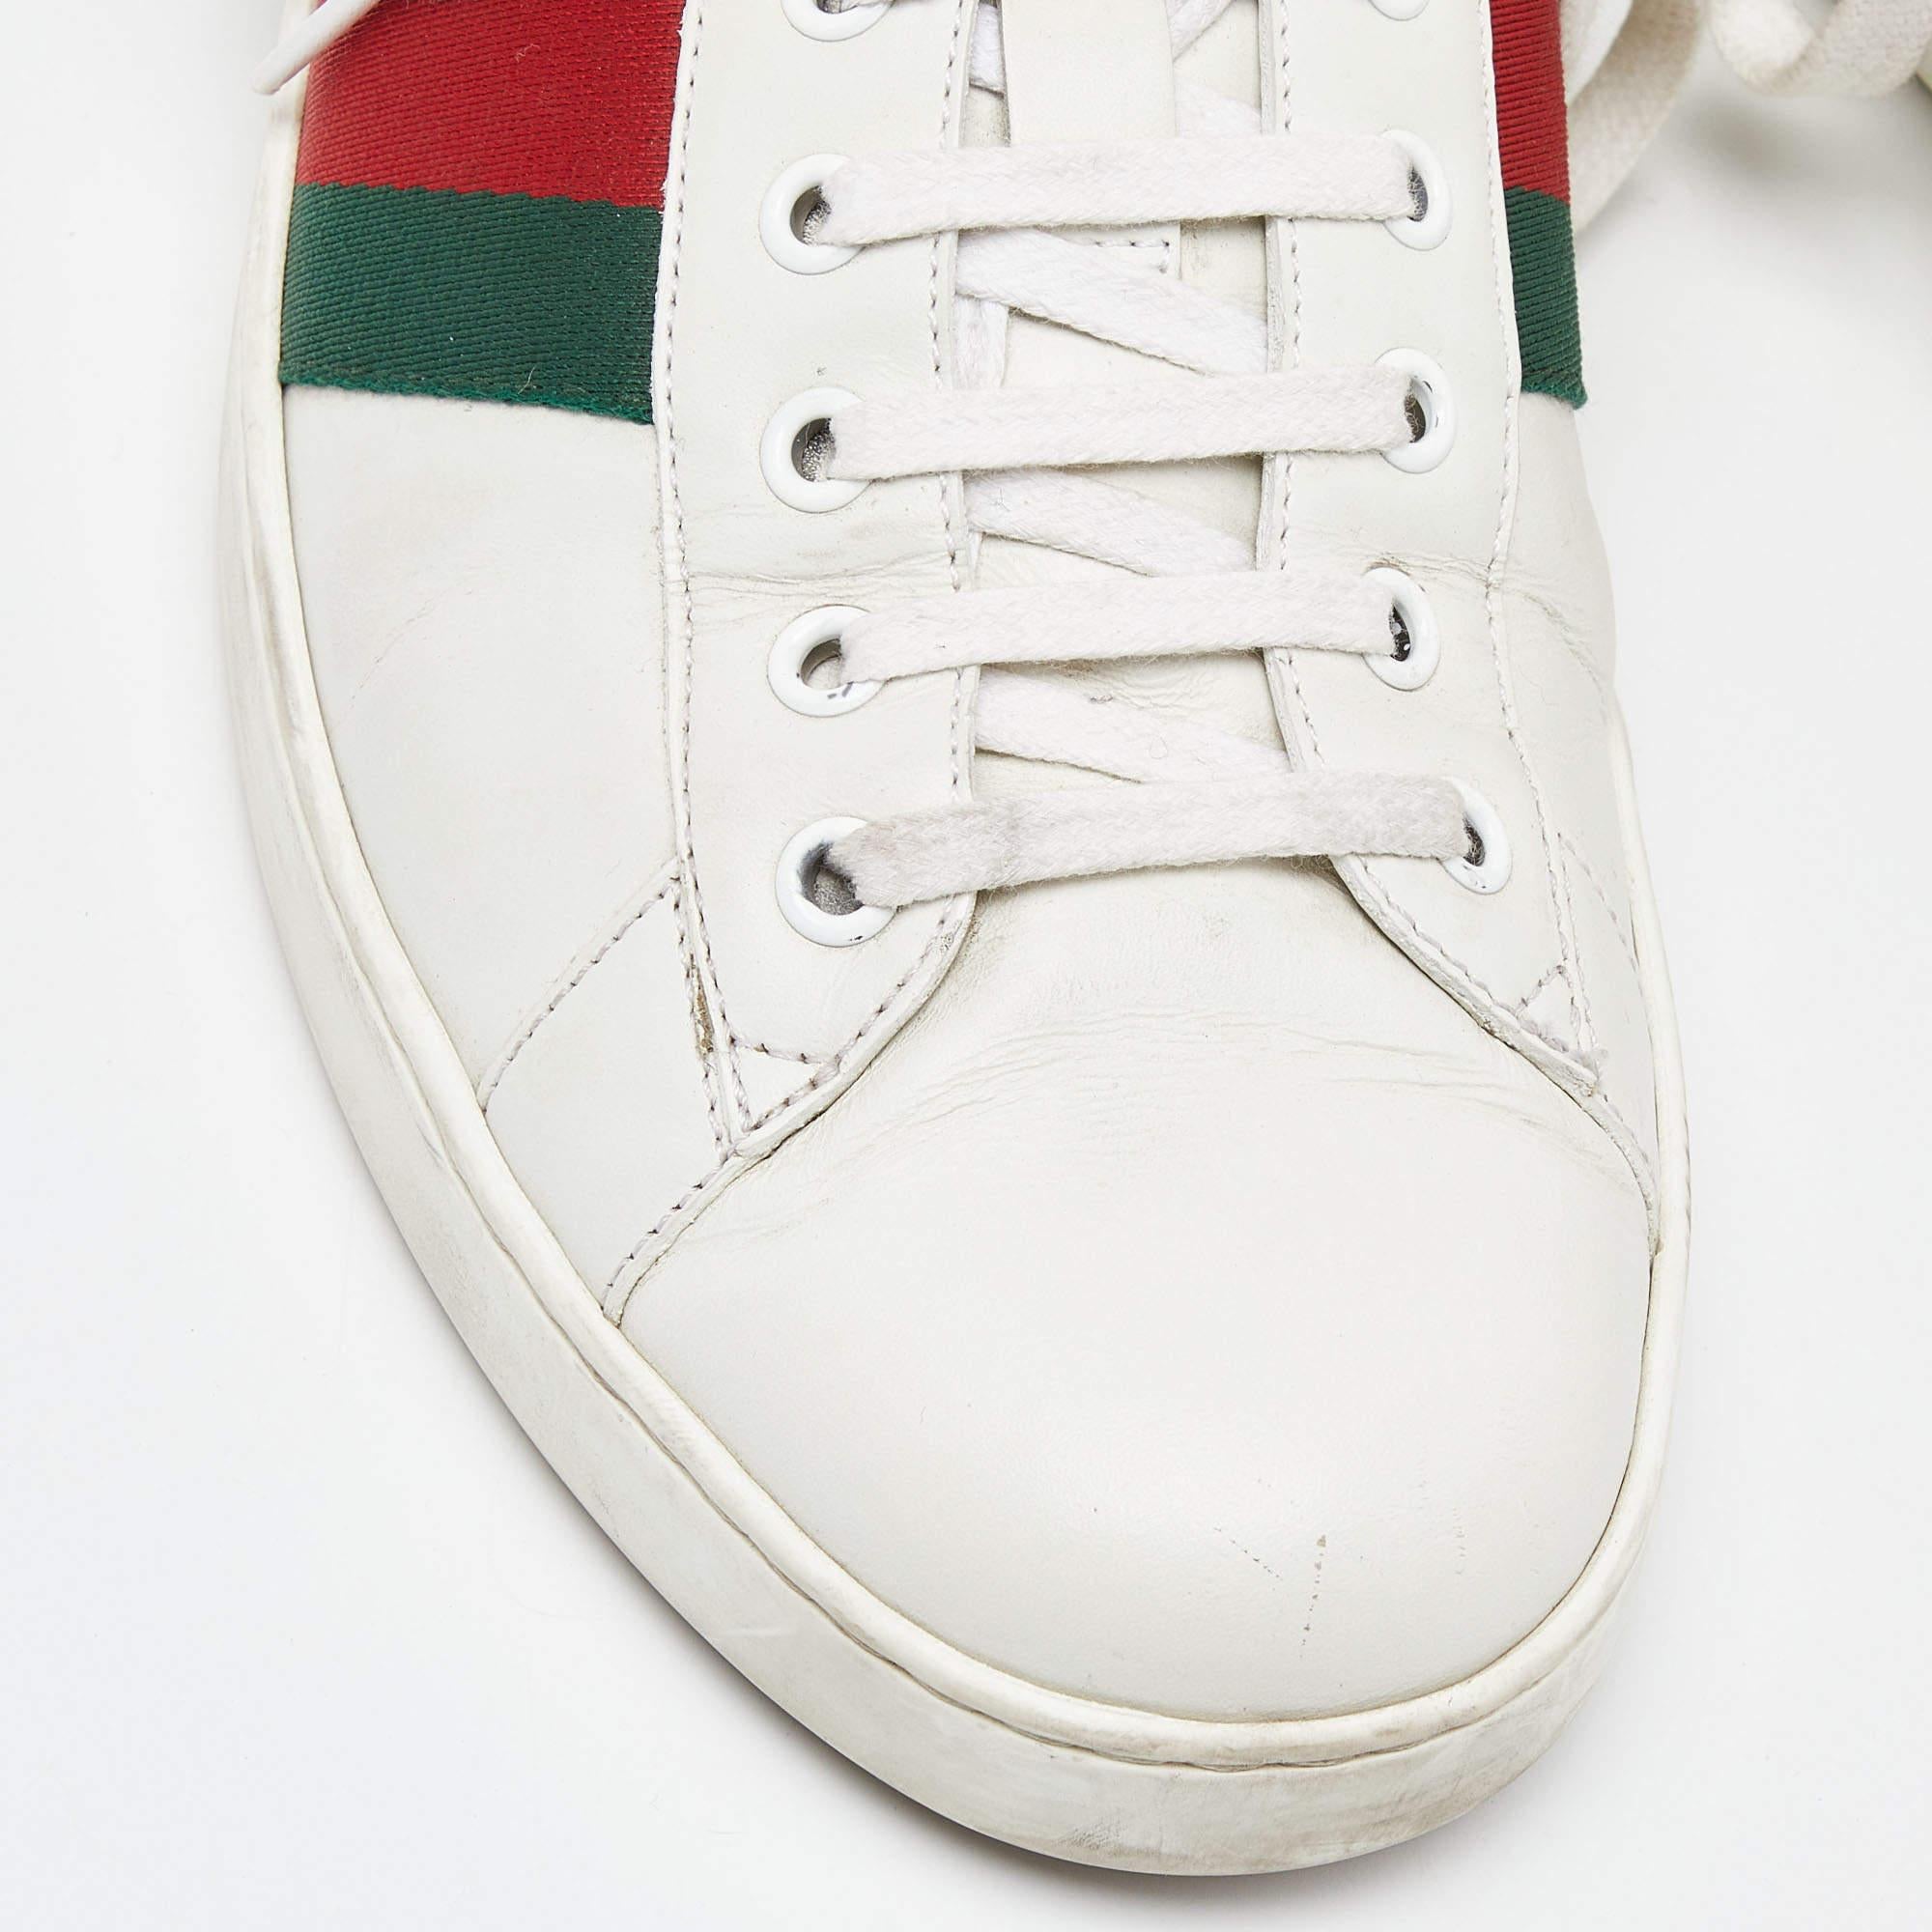 Stacked with signature details, this Gucci pair is rendered in leather and is designed in a low-cut style with lace-up vamps. They have been fashioned with iconic web stripes. Complete with contrasting trims carrying the brand label on the counters,